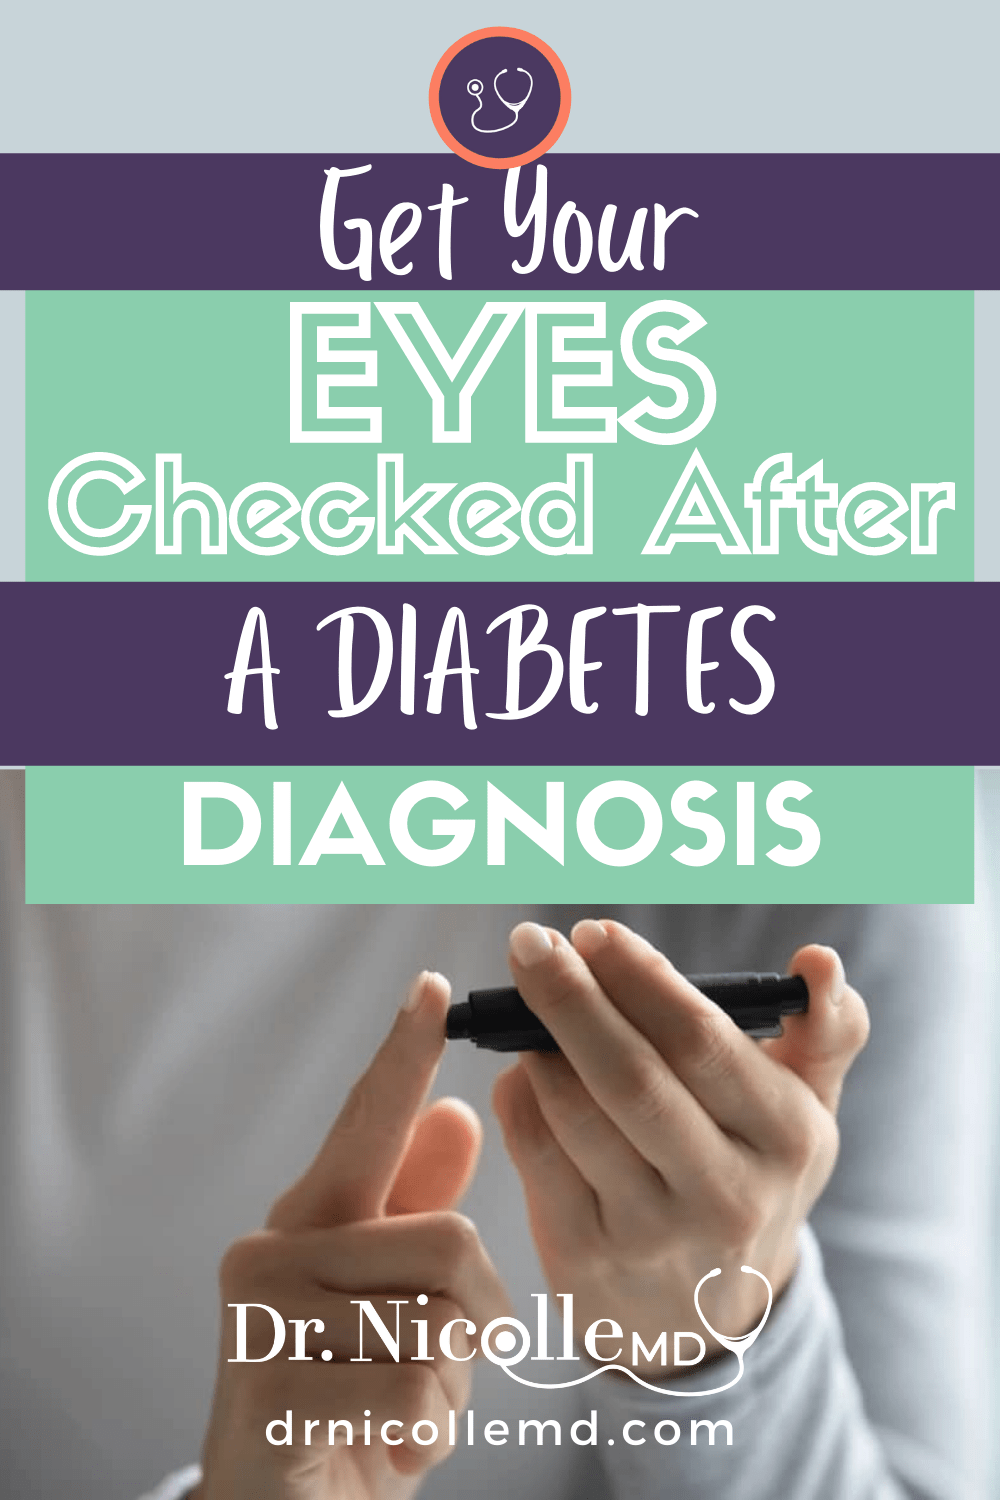 Get Your Eyes Checked After a Diabetes Diagnosis